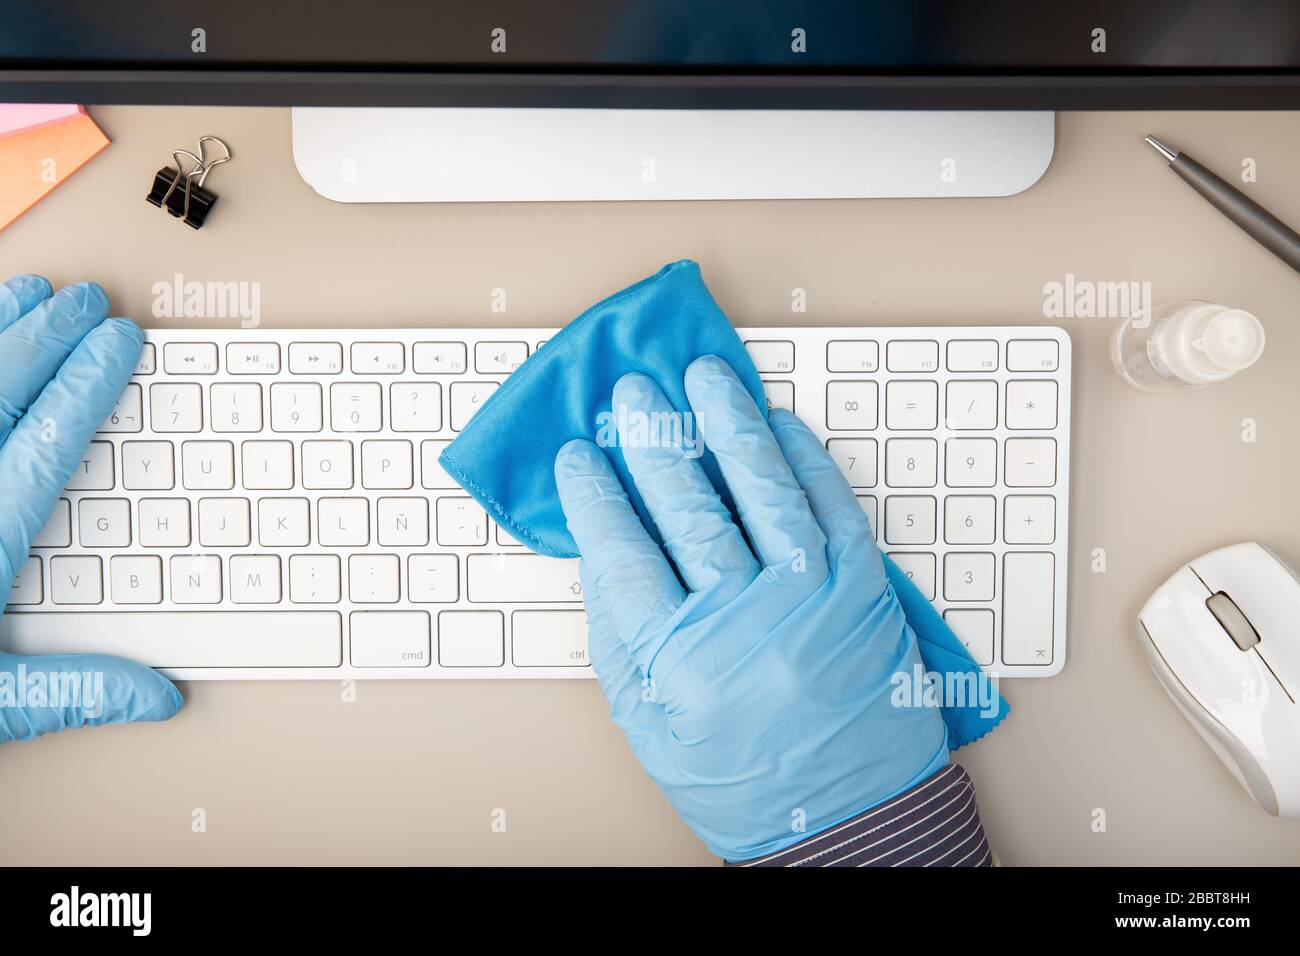 Hand with protective glove cleaning a keyboard with disinfectant. COVID-19 Coronavirus outbreak prevention concept. Top view Stock Photo